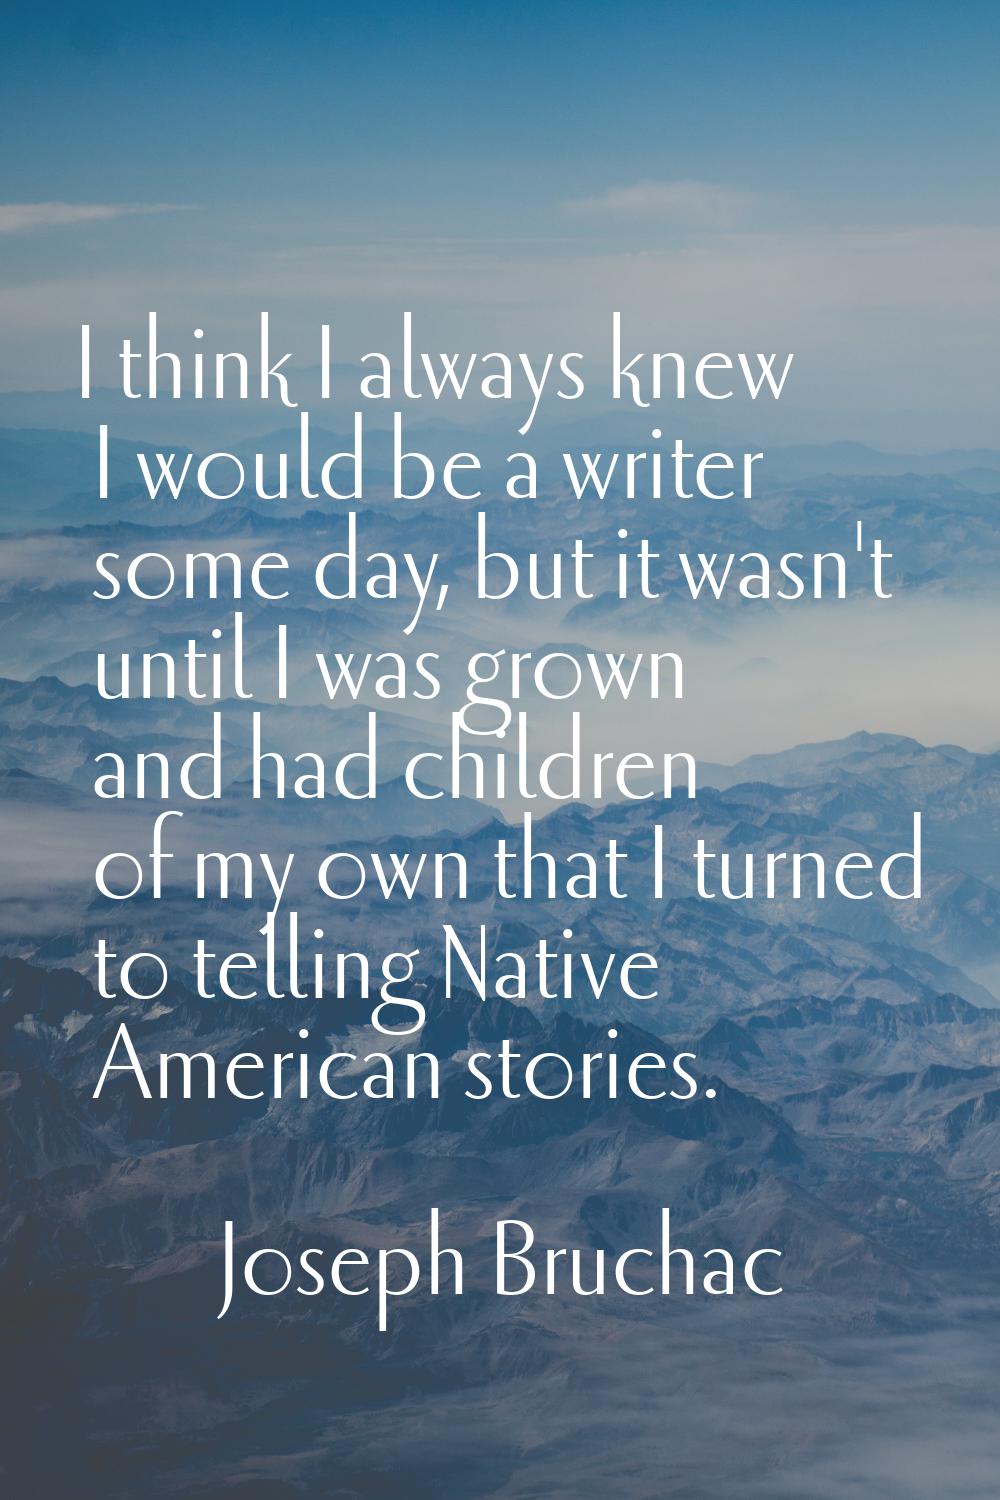 I think I always knew I would be a writer some day, but it wasn't until I was grown and had childre